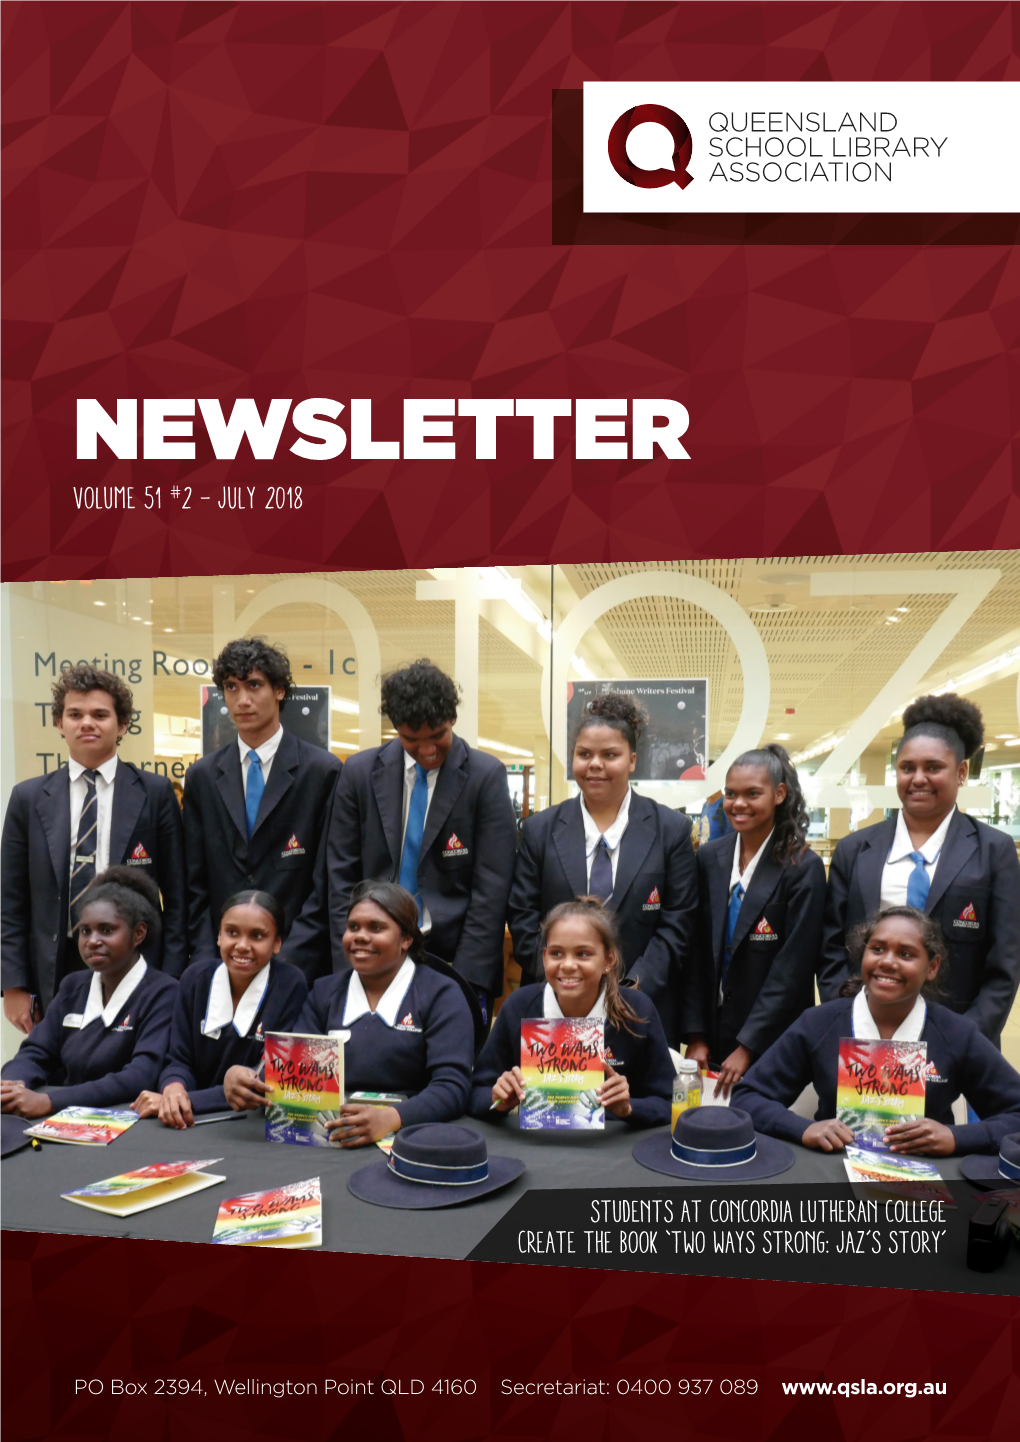 NEWSLETTER Find out Why School Libraries